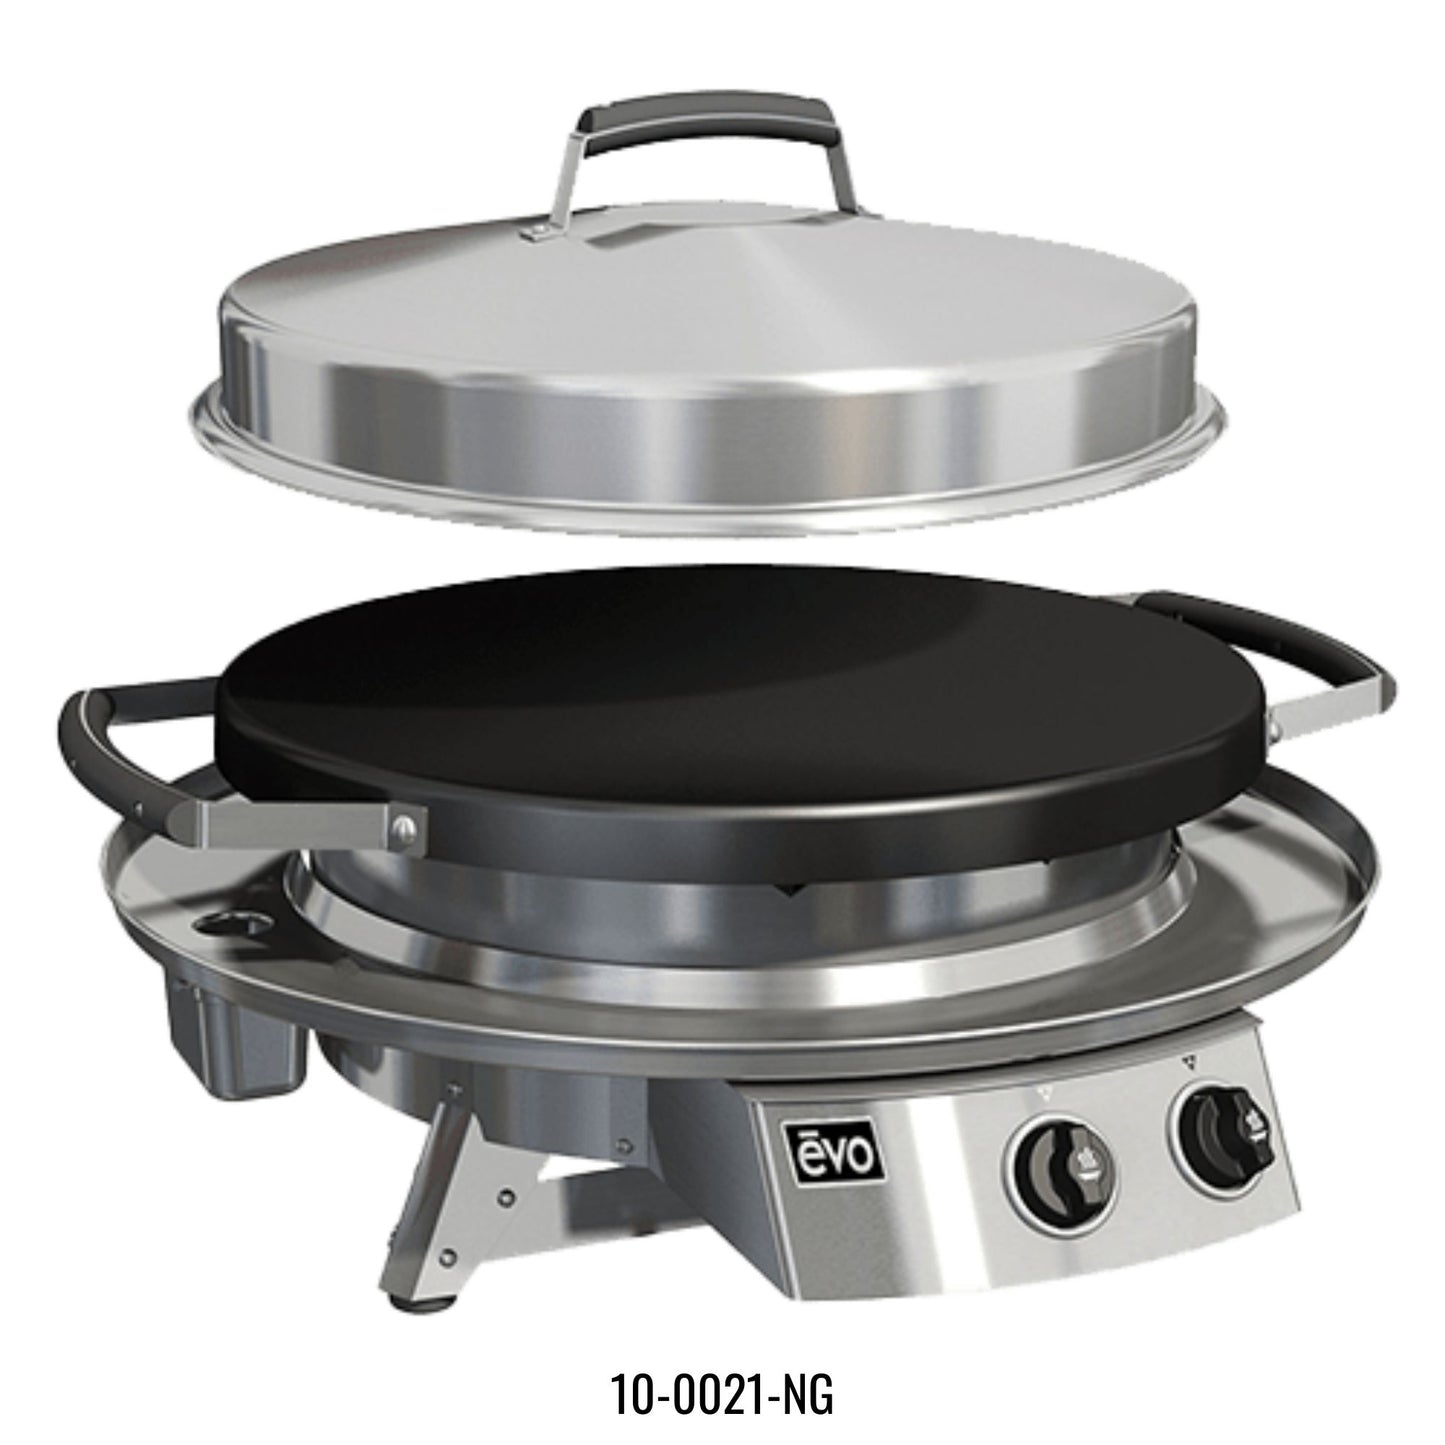 EVO PROFESSIONAL TABLETOP WITH SEASONED COOKSURFACE NG GAS